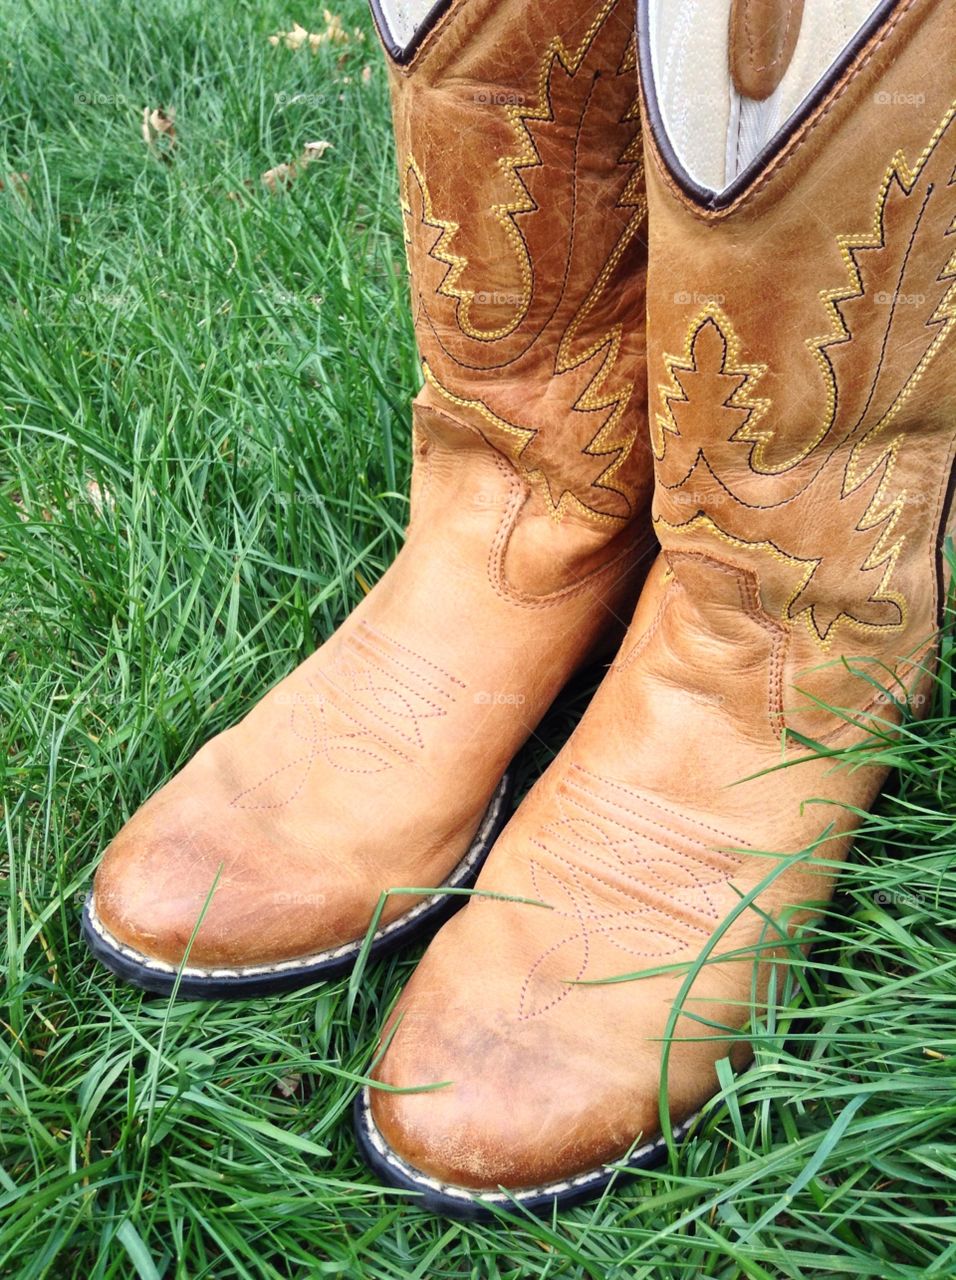 Cowgirl boots. Girls cowboy boots in grass